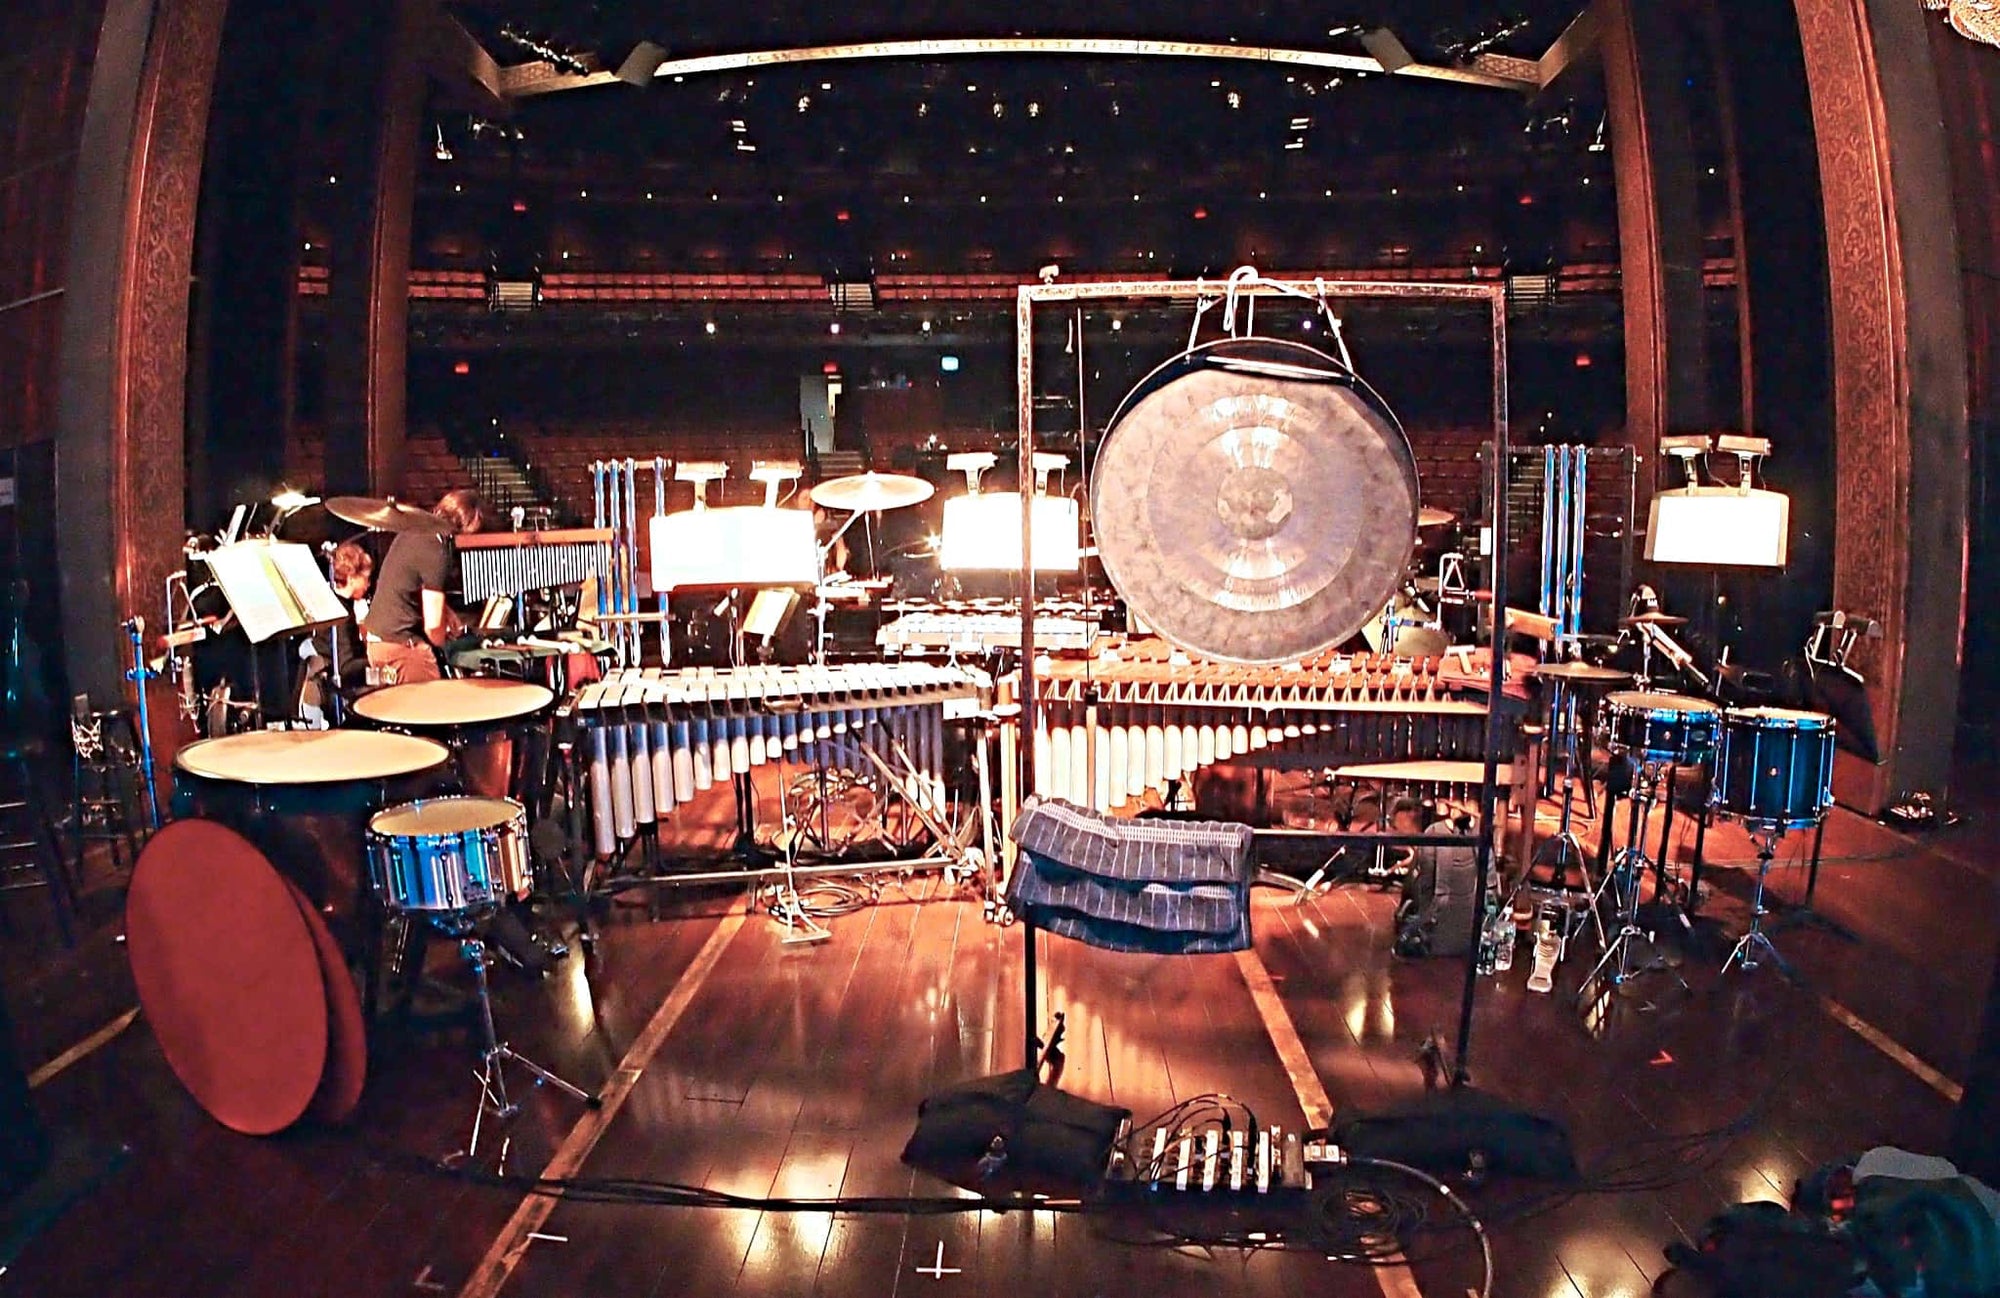 Billy Miller's setup for the Lincoln Center Benefit Concert of the Broadway show The Light In The Piazza.